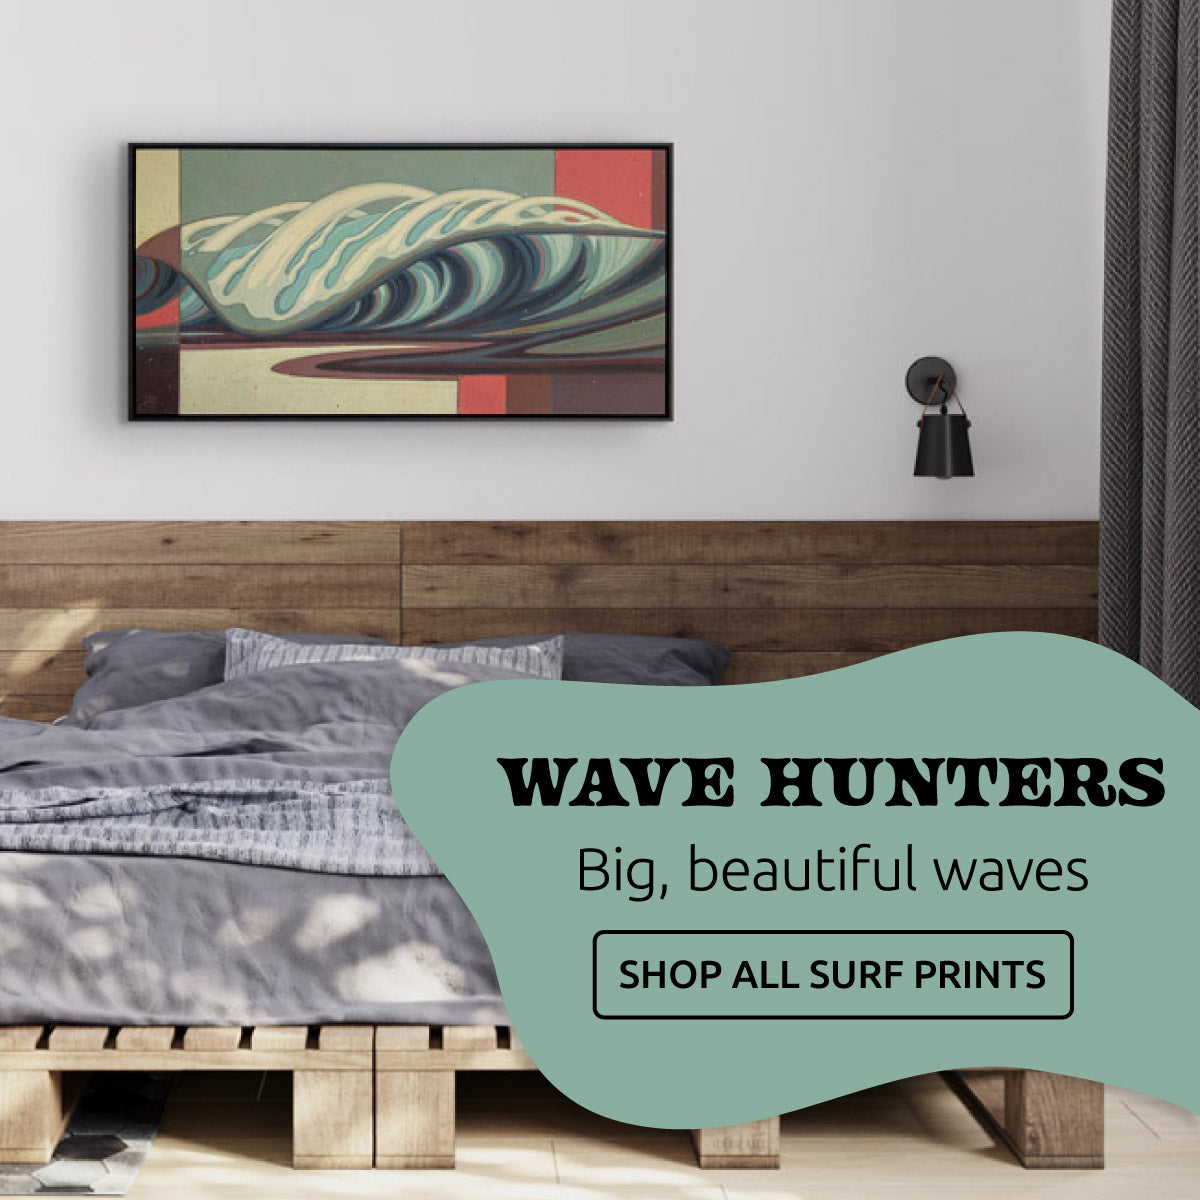 Untidy bed and wave print over the wall- PNW Artist